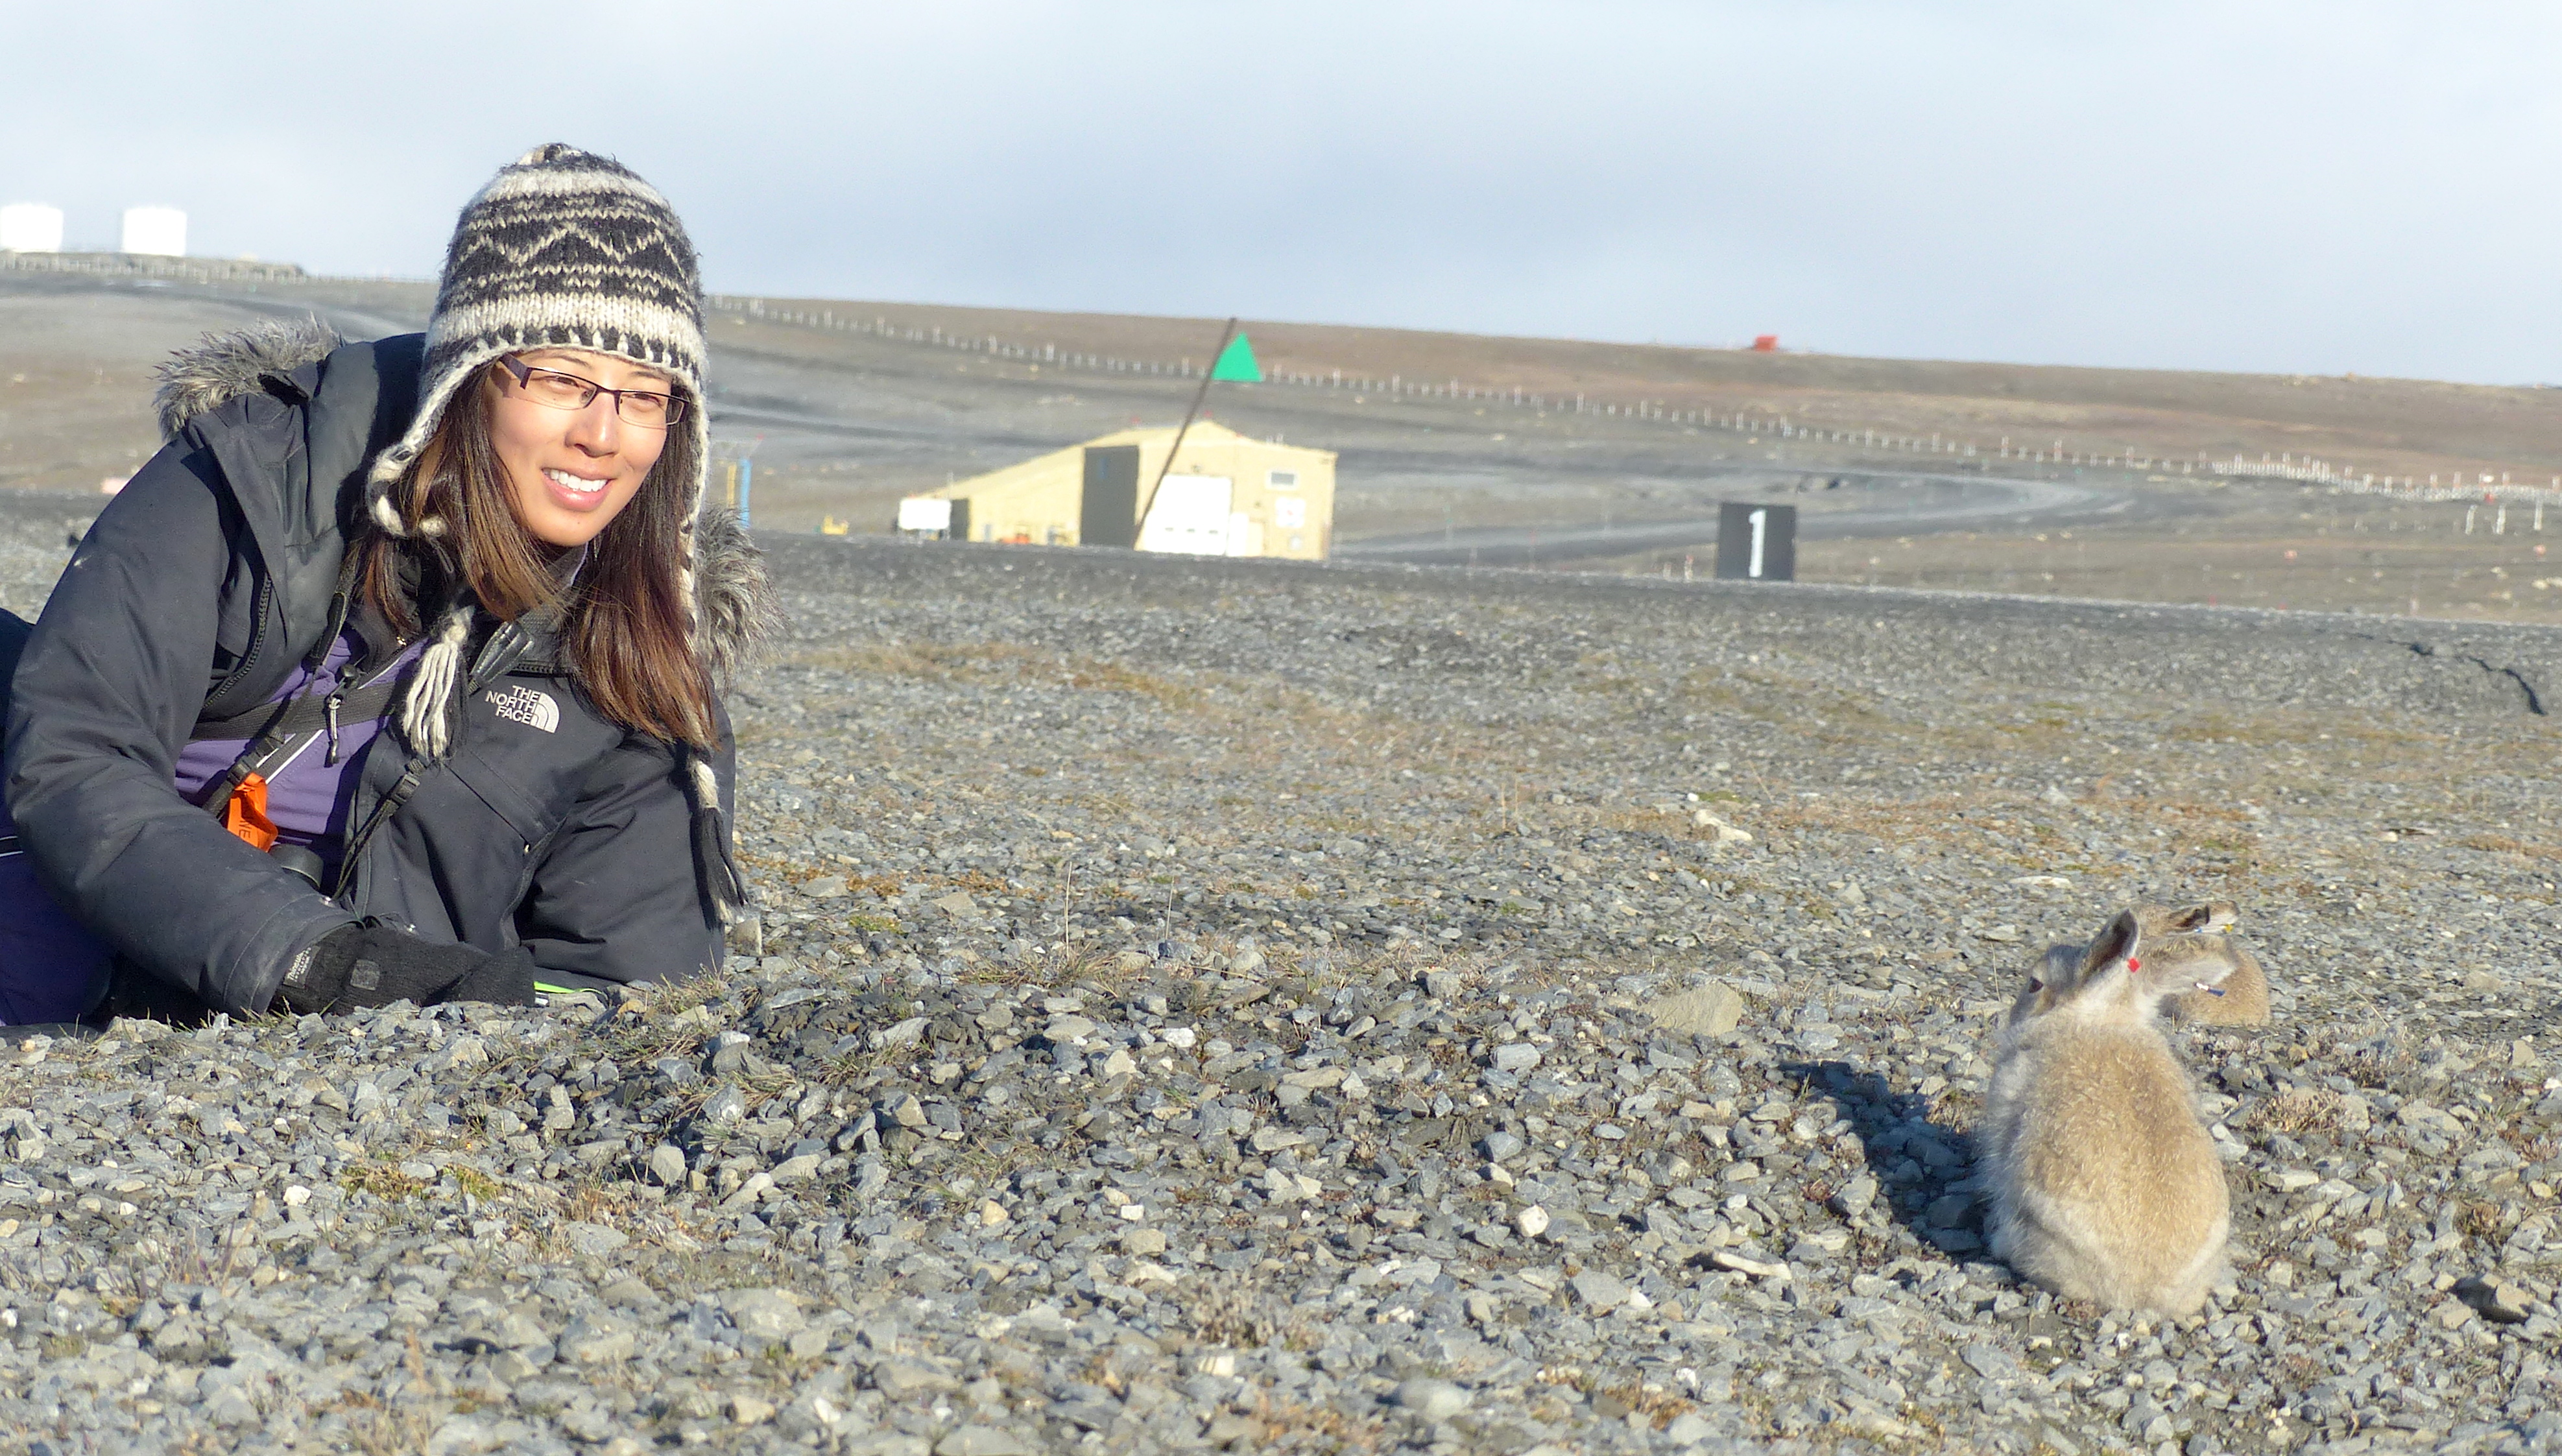 Dr Sandra Lai at work in the Arctic